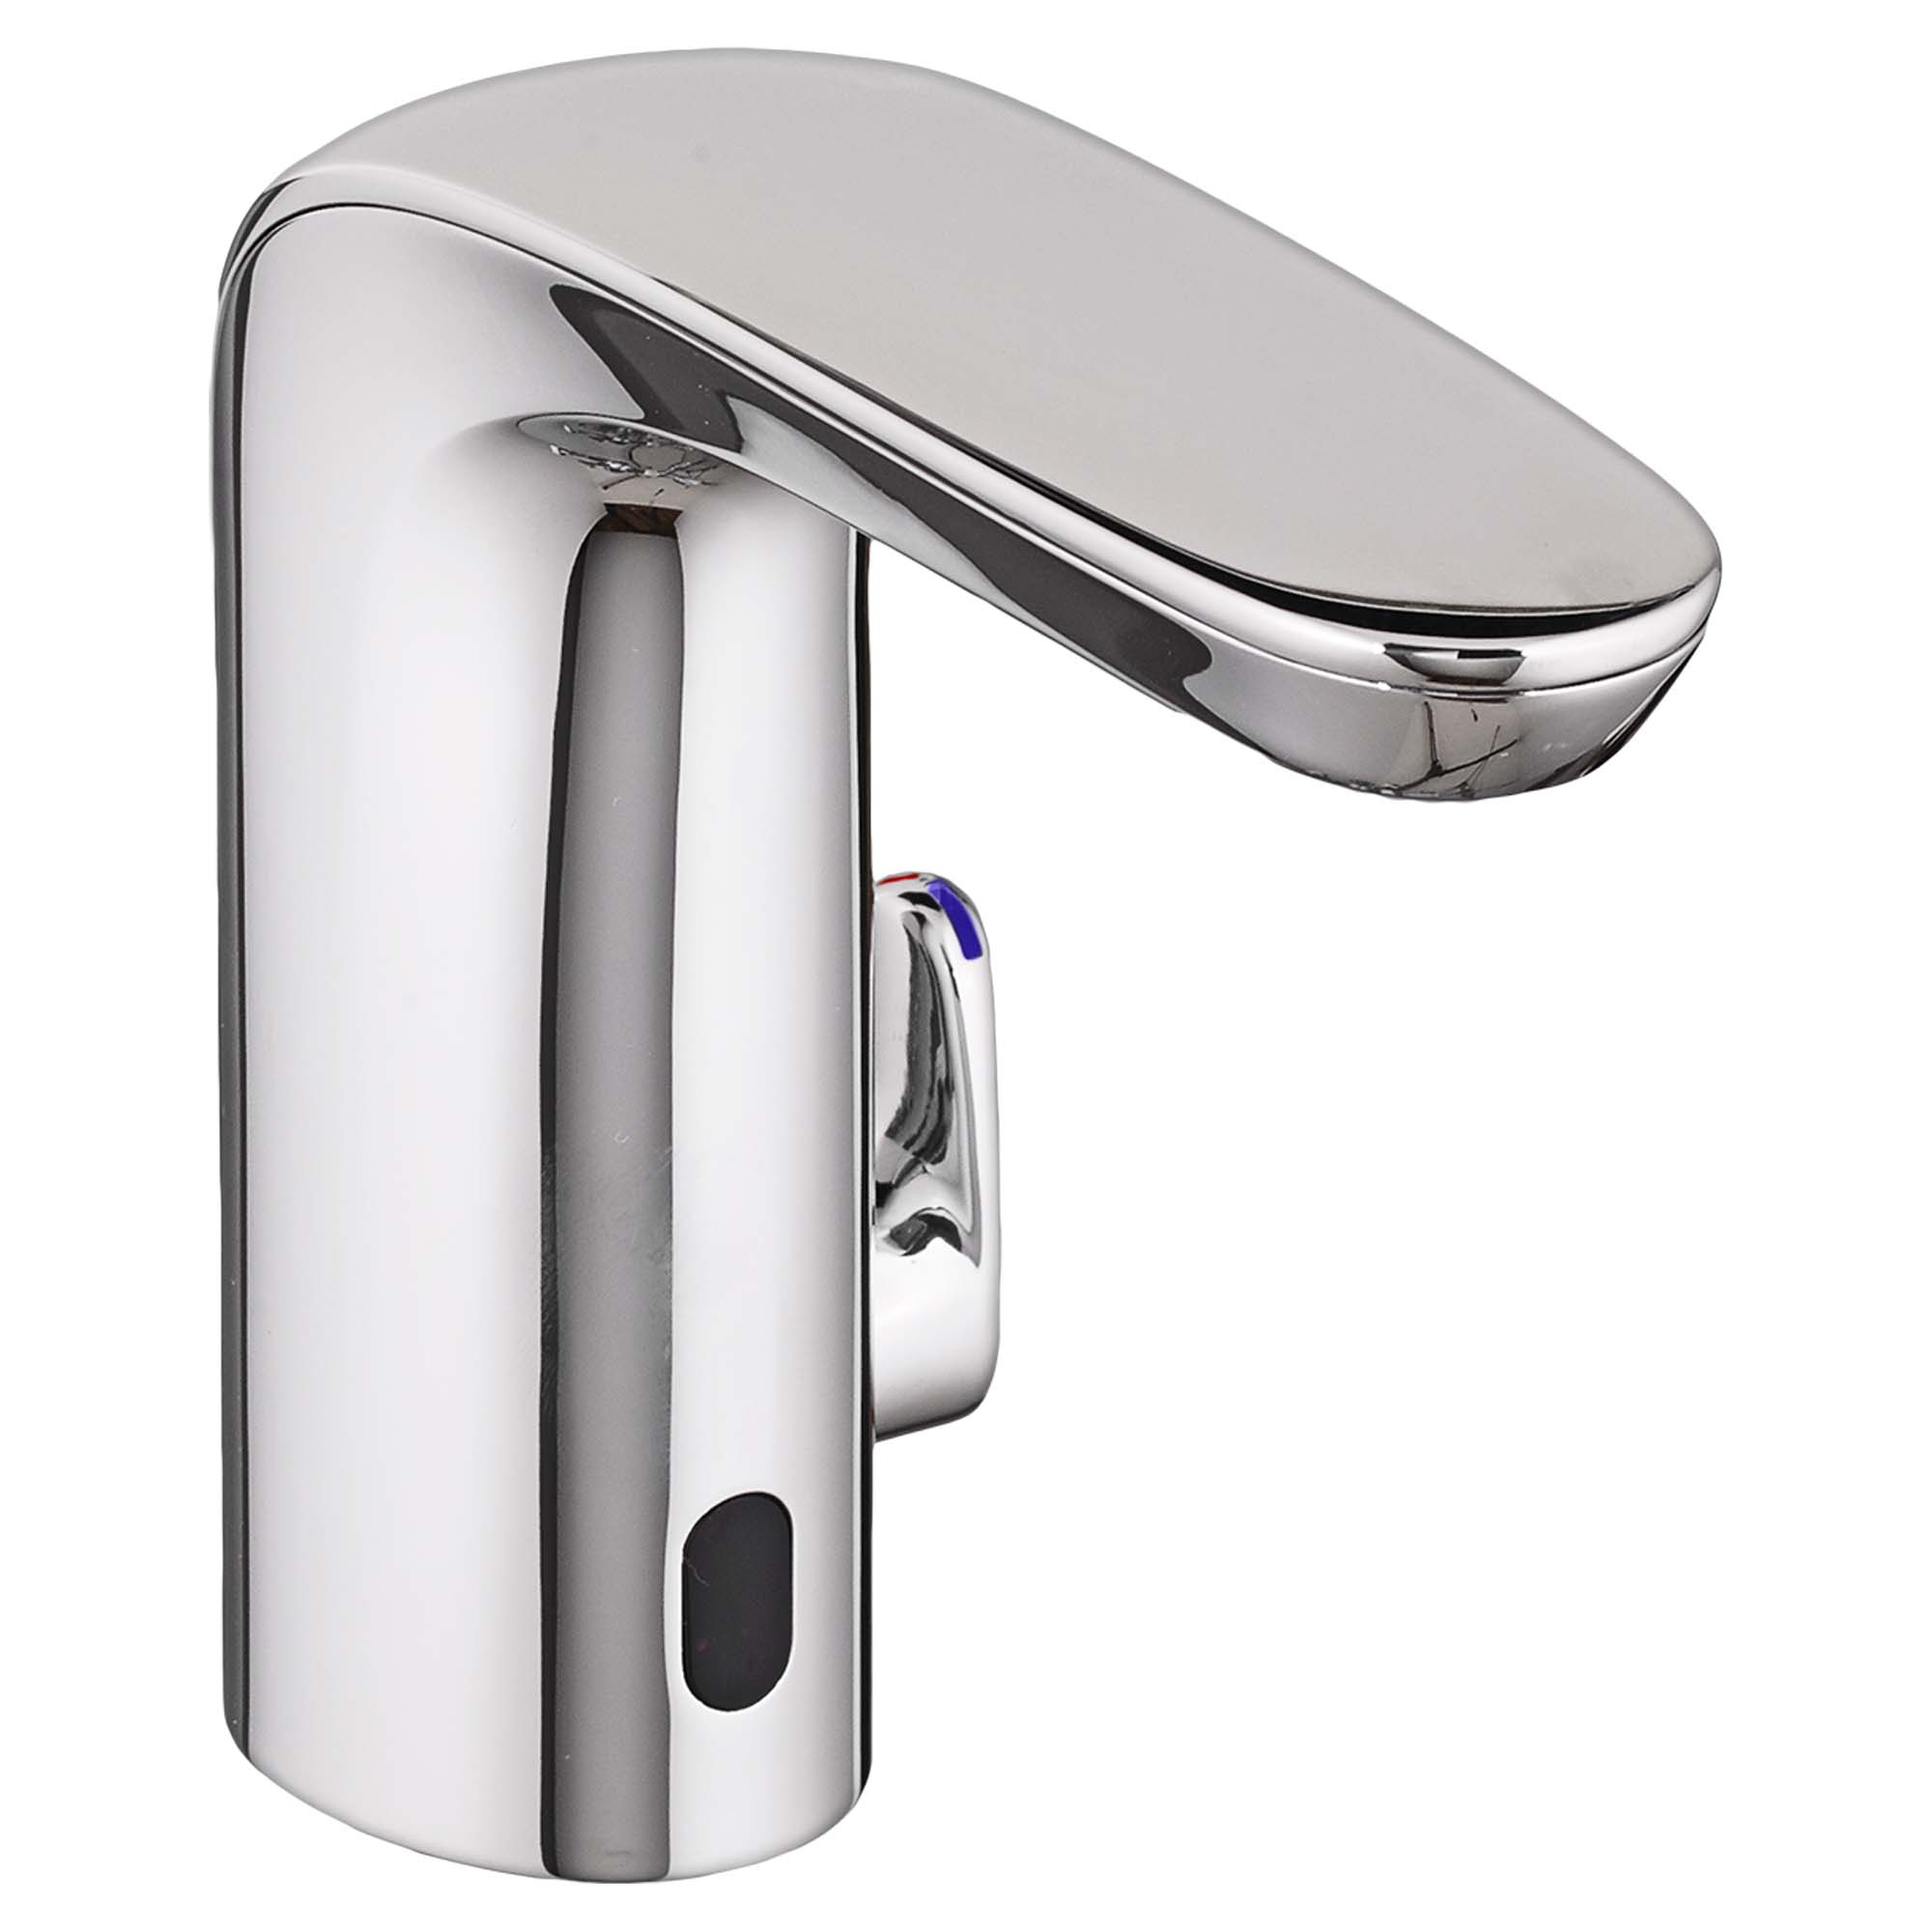 NextGen Selectronic™ Touchless Faucet, Base Model With SmarTherm Safety Shut-Off + ADM, 0.5 gpm/1.9 Lpm